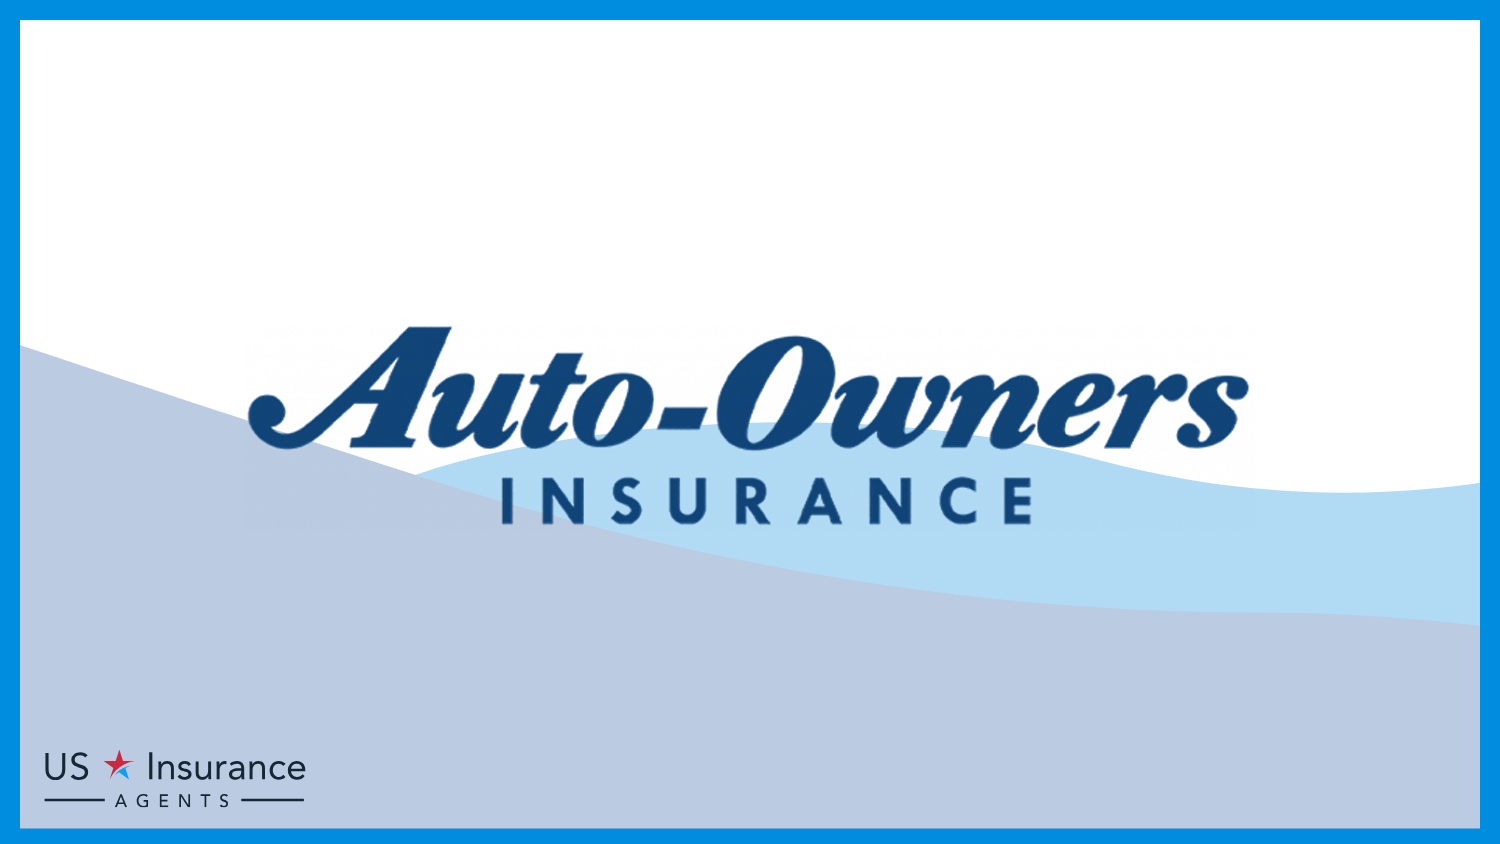 Auto-Owner: Best Business Insurance for Pressure Washing Businesses